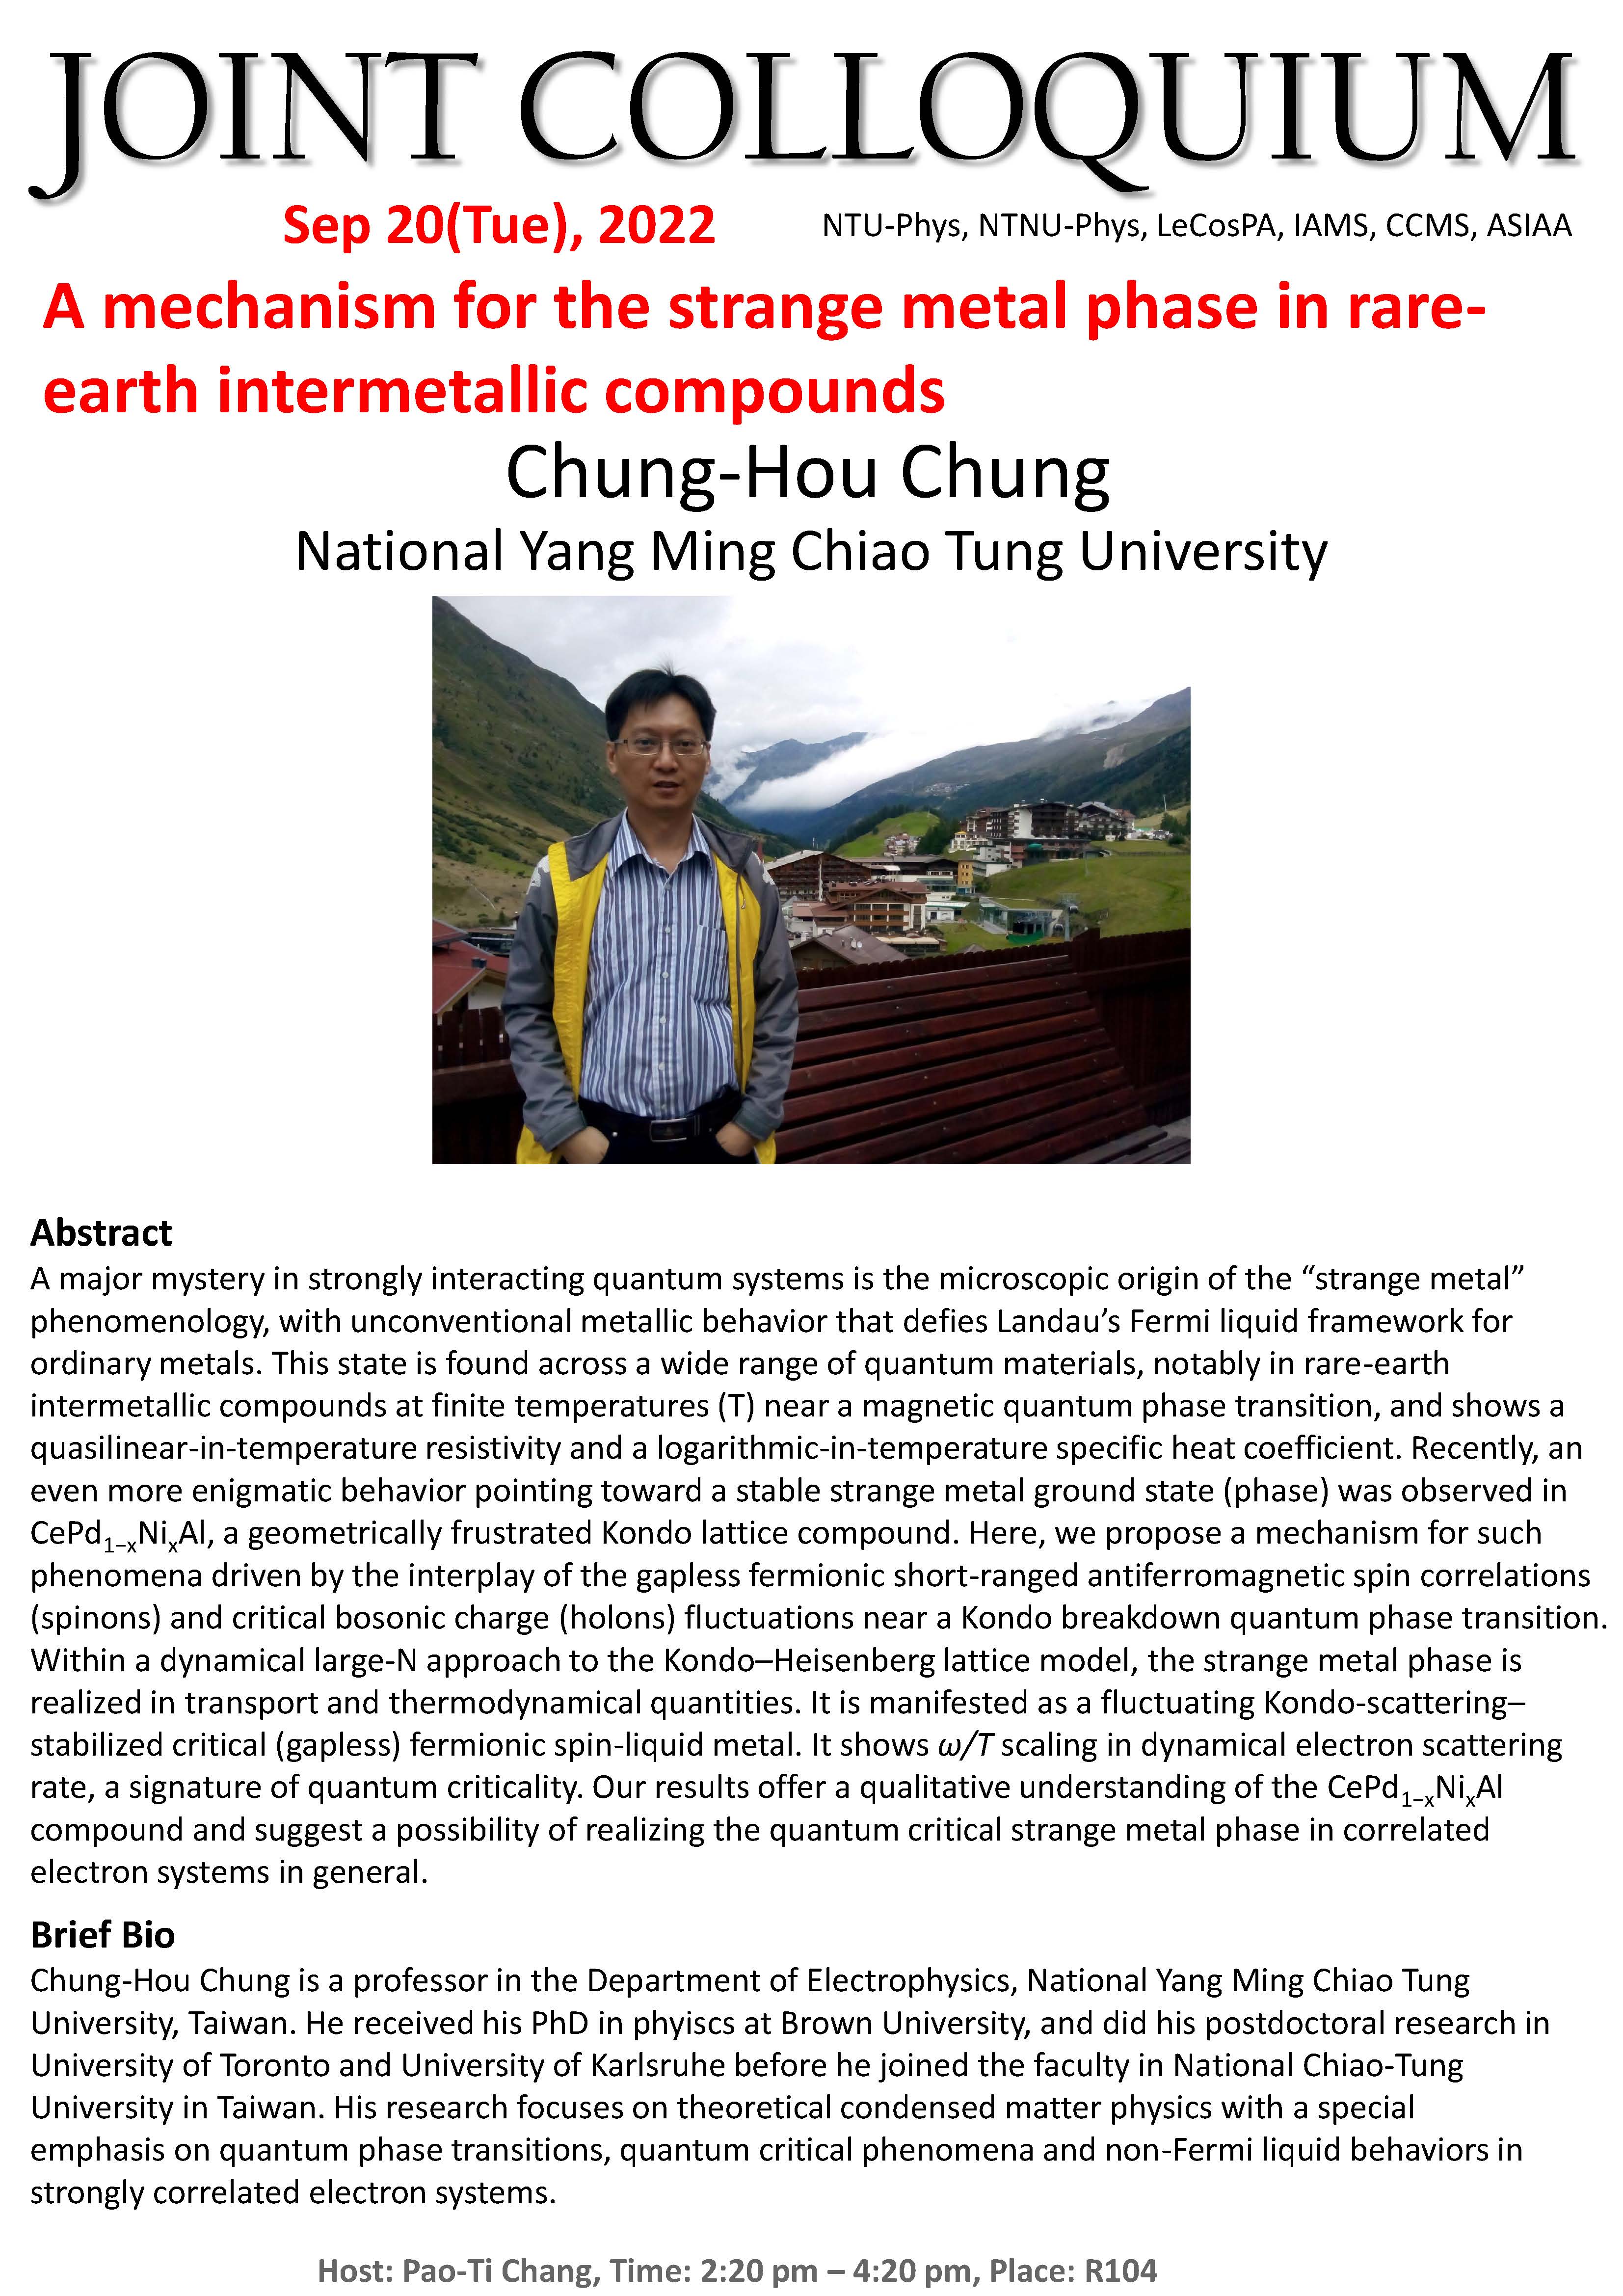 【2022-09-20】A mechanism for the strange metal phase in rare-earth intermetallic compounds